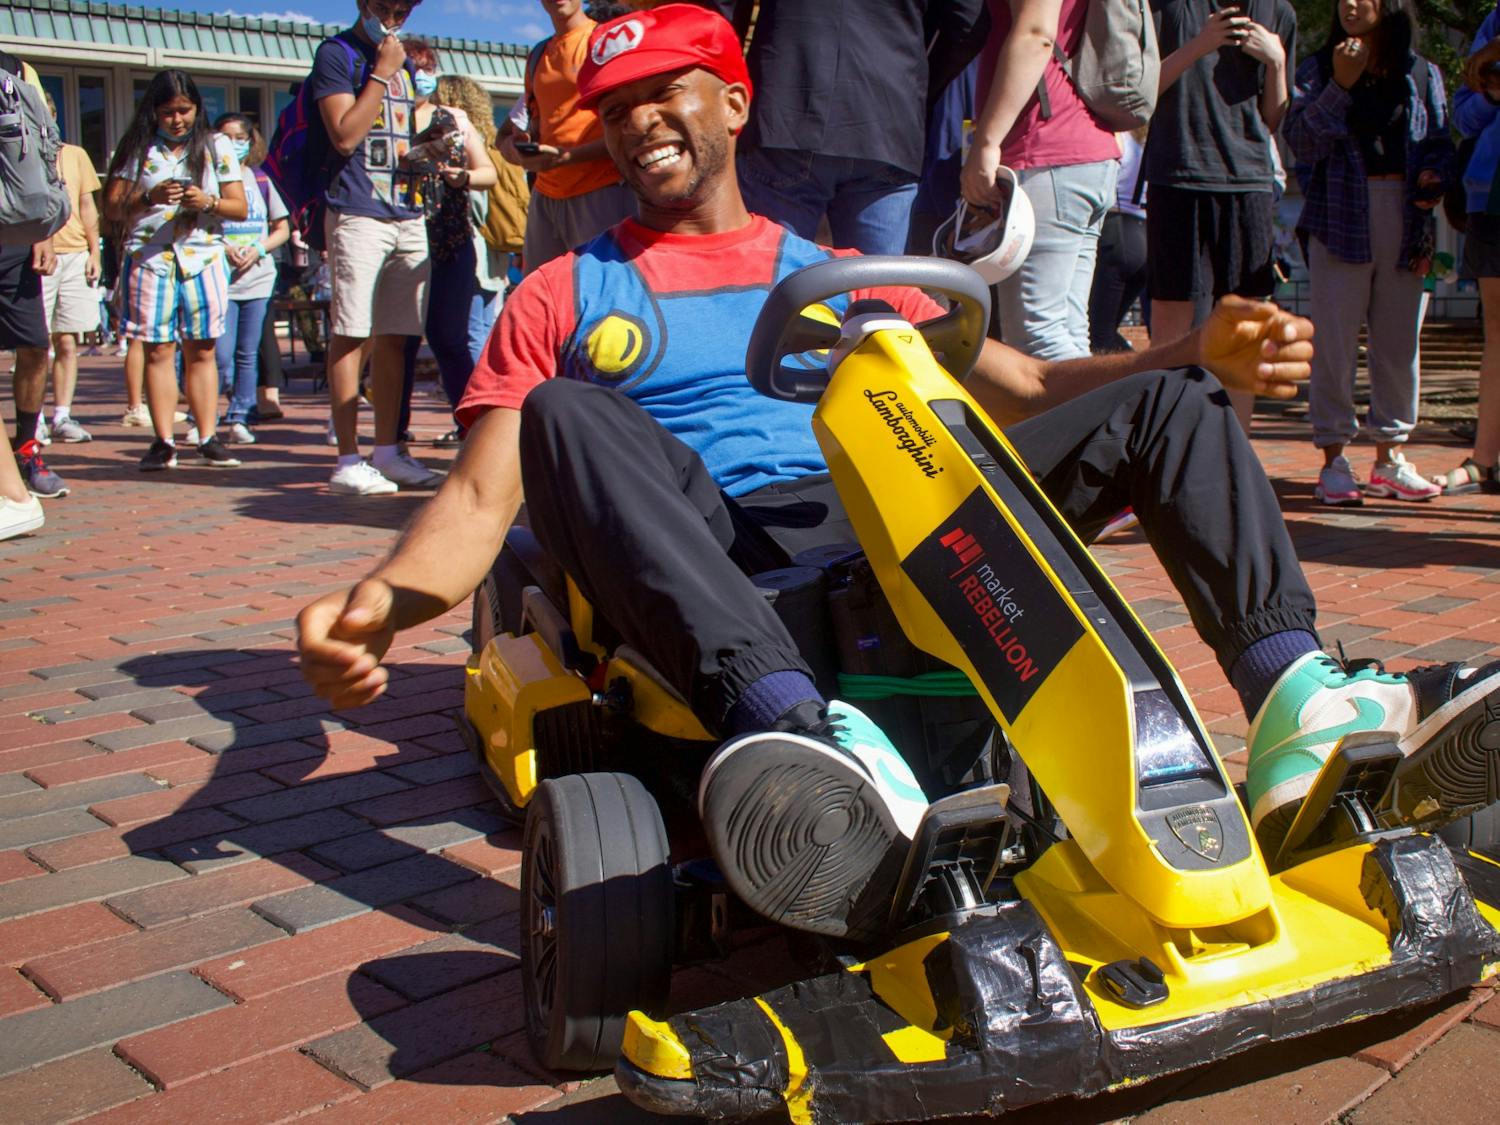 Joshua Schaffer, known virally as WeathermanJosh, dresses as Mario and rides a go-kart through the Pit on Sept. 22. "Make sure to subscribe to my YouTube channel," he prompted people as they stopped for pictures.